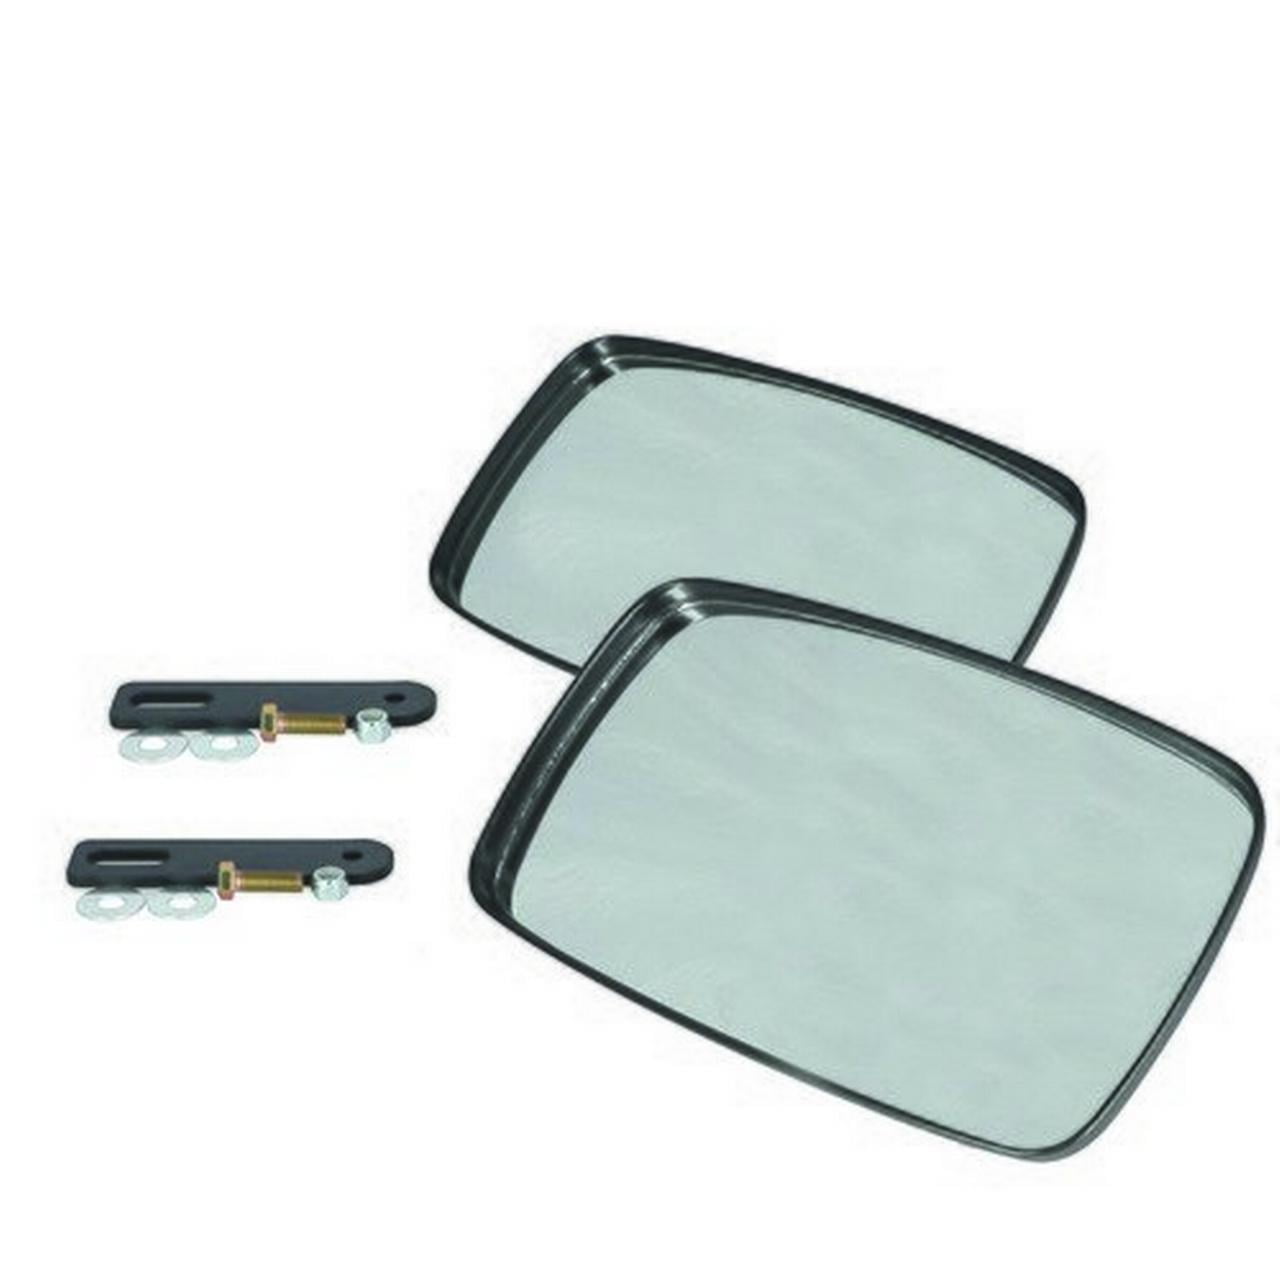 2x Universal Rear View Mirror 42 x 20 Mirror for Truck Bus Tractor Digger 